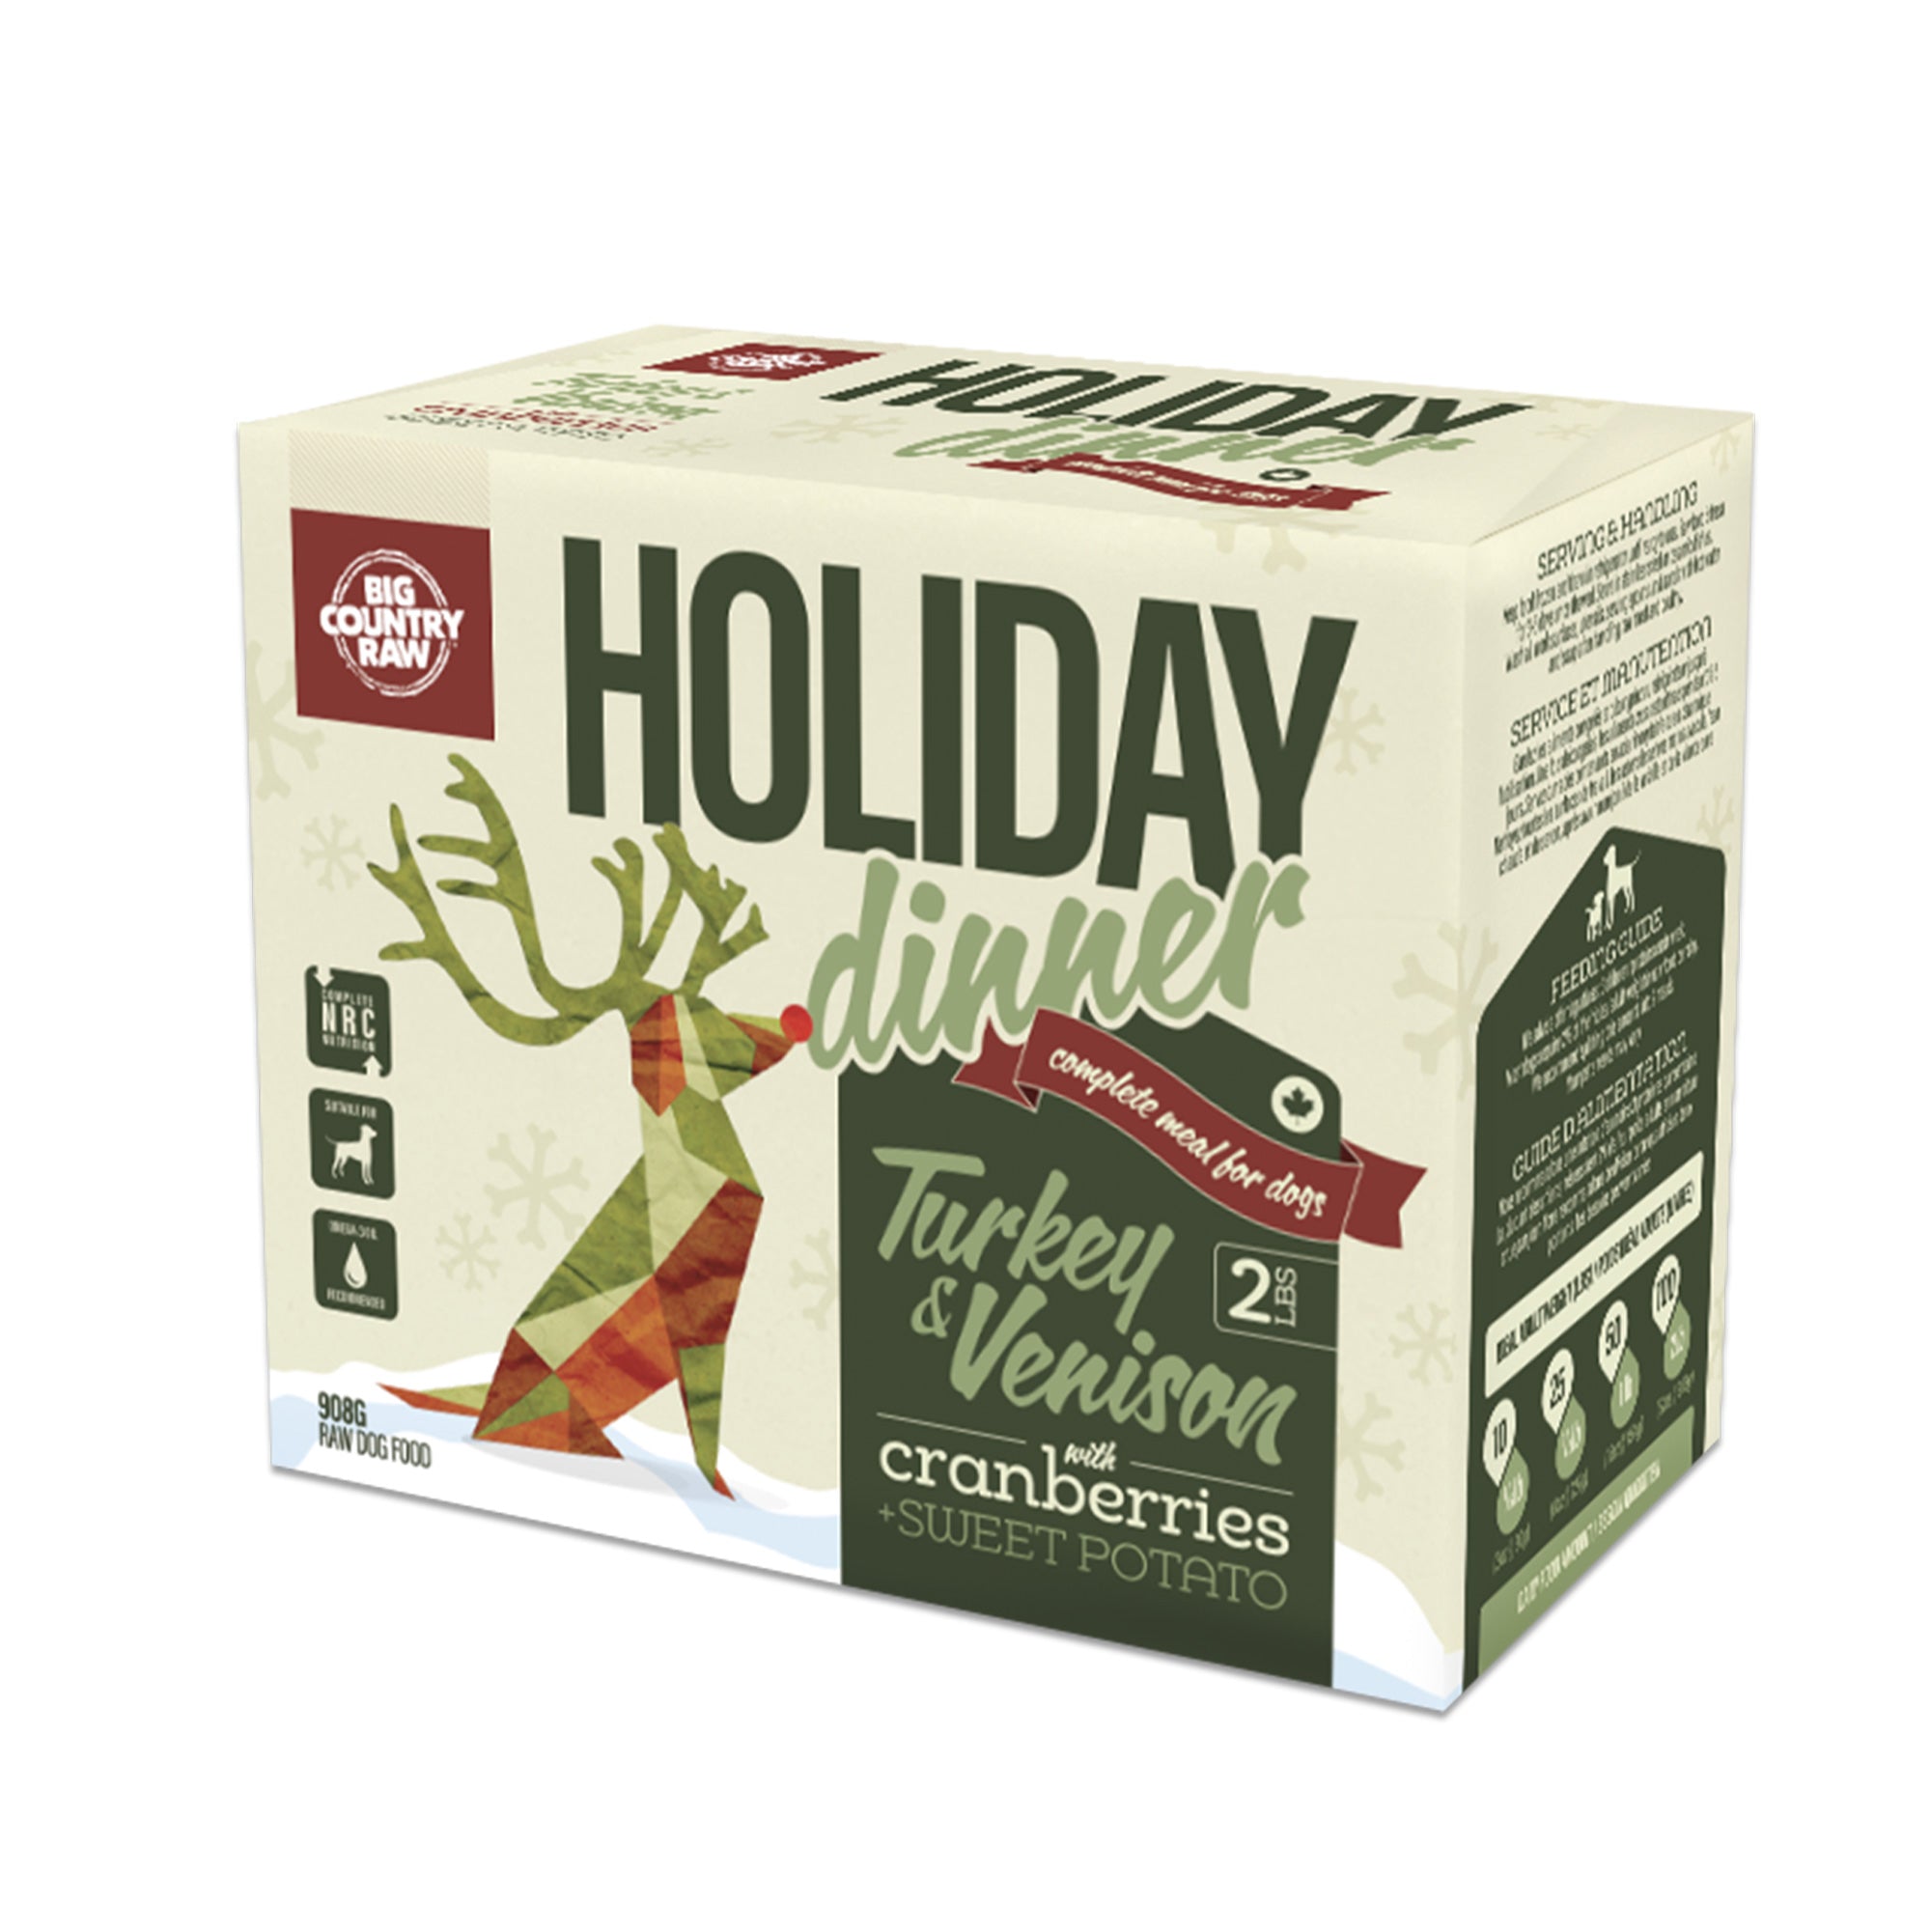 Big Country Raw Holiday -Turkey Venison - Limited Time